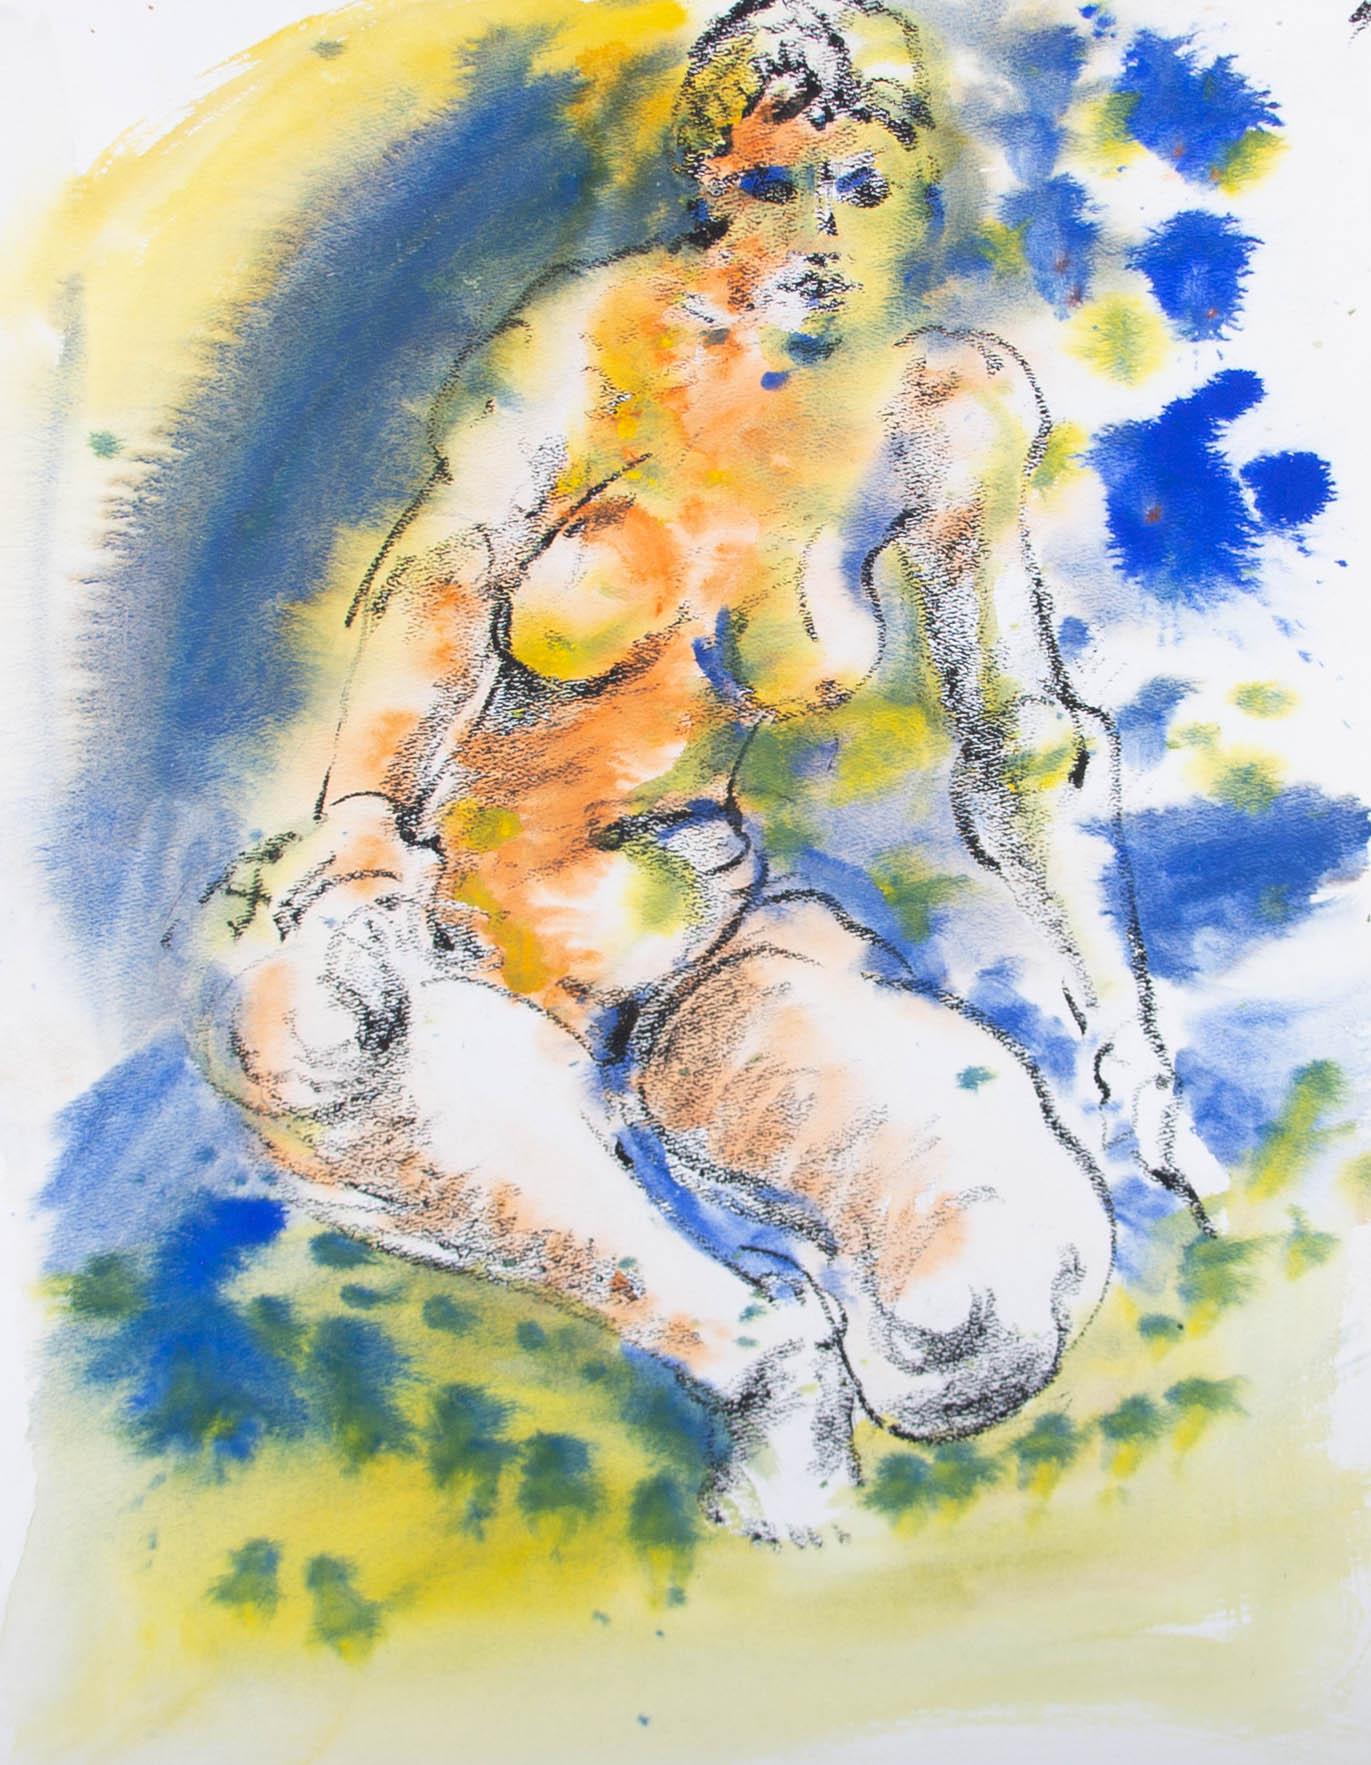 A vibrant watercolour painting with charcoal by the American artist Hendrik Grise, depicting a seated nude figure. Even though this work is unsigned, it belongs to a collection by the artist. On watercolour paper.
